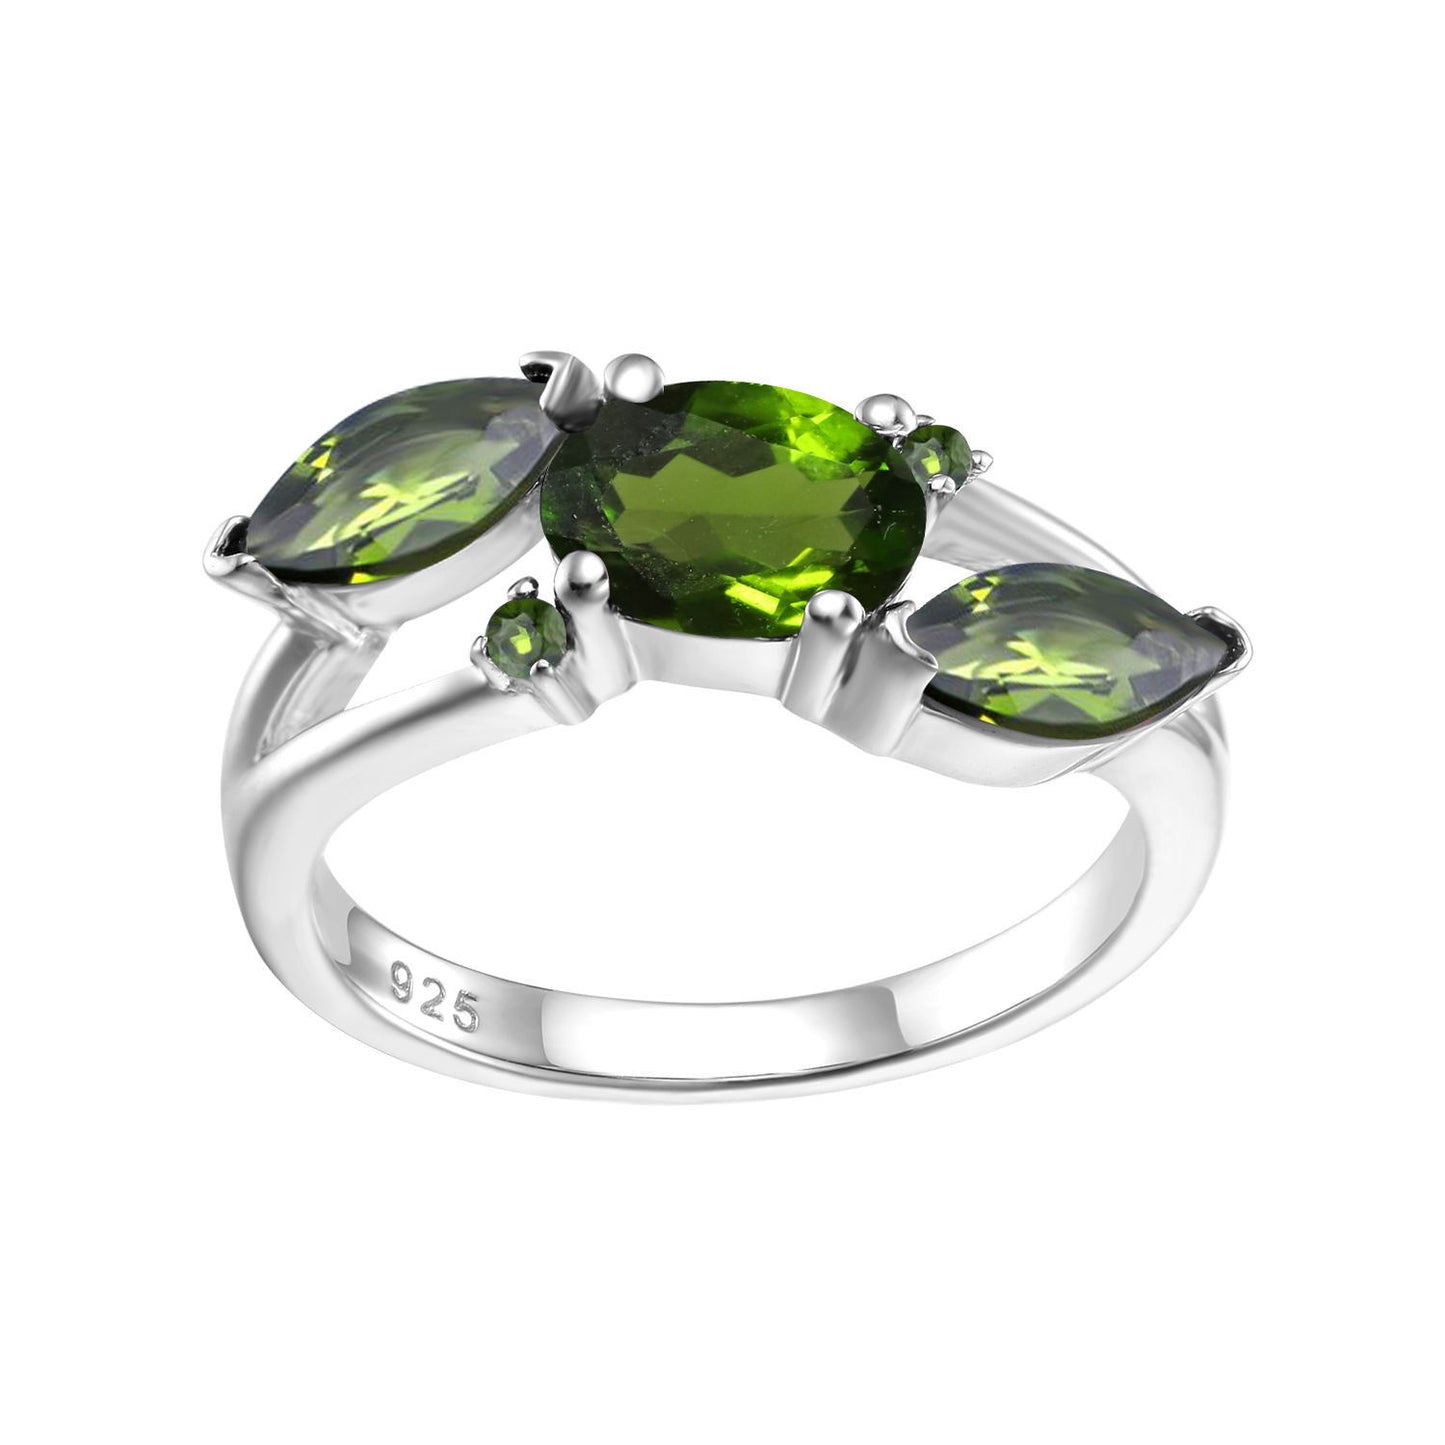 Oval Shape and Marquise Shape Three Natural Gemstones Silver Ring